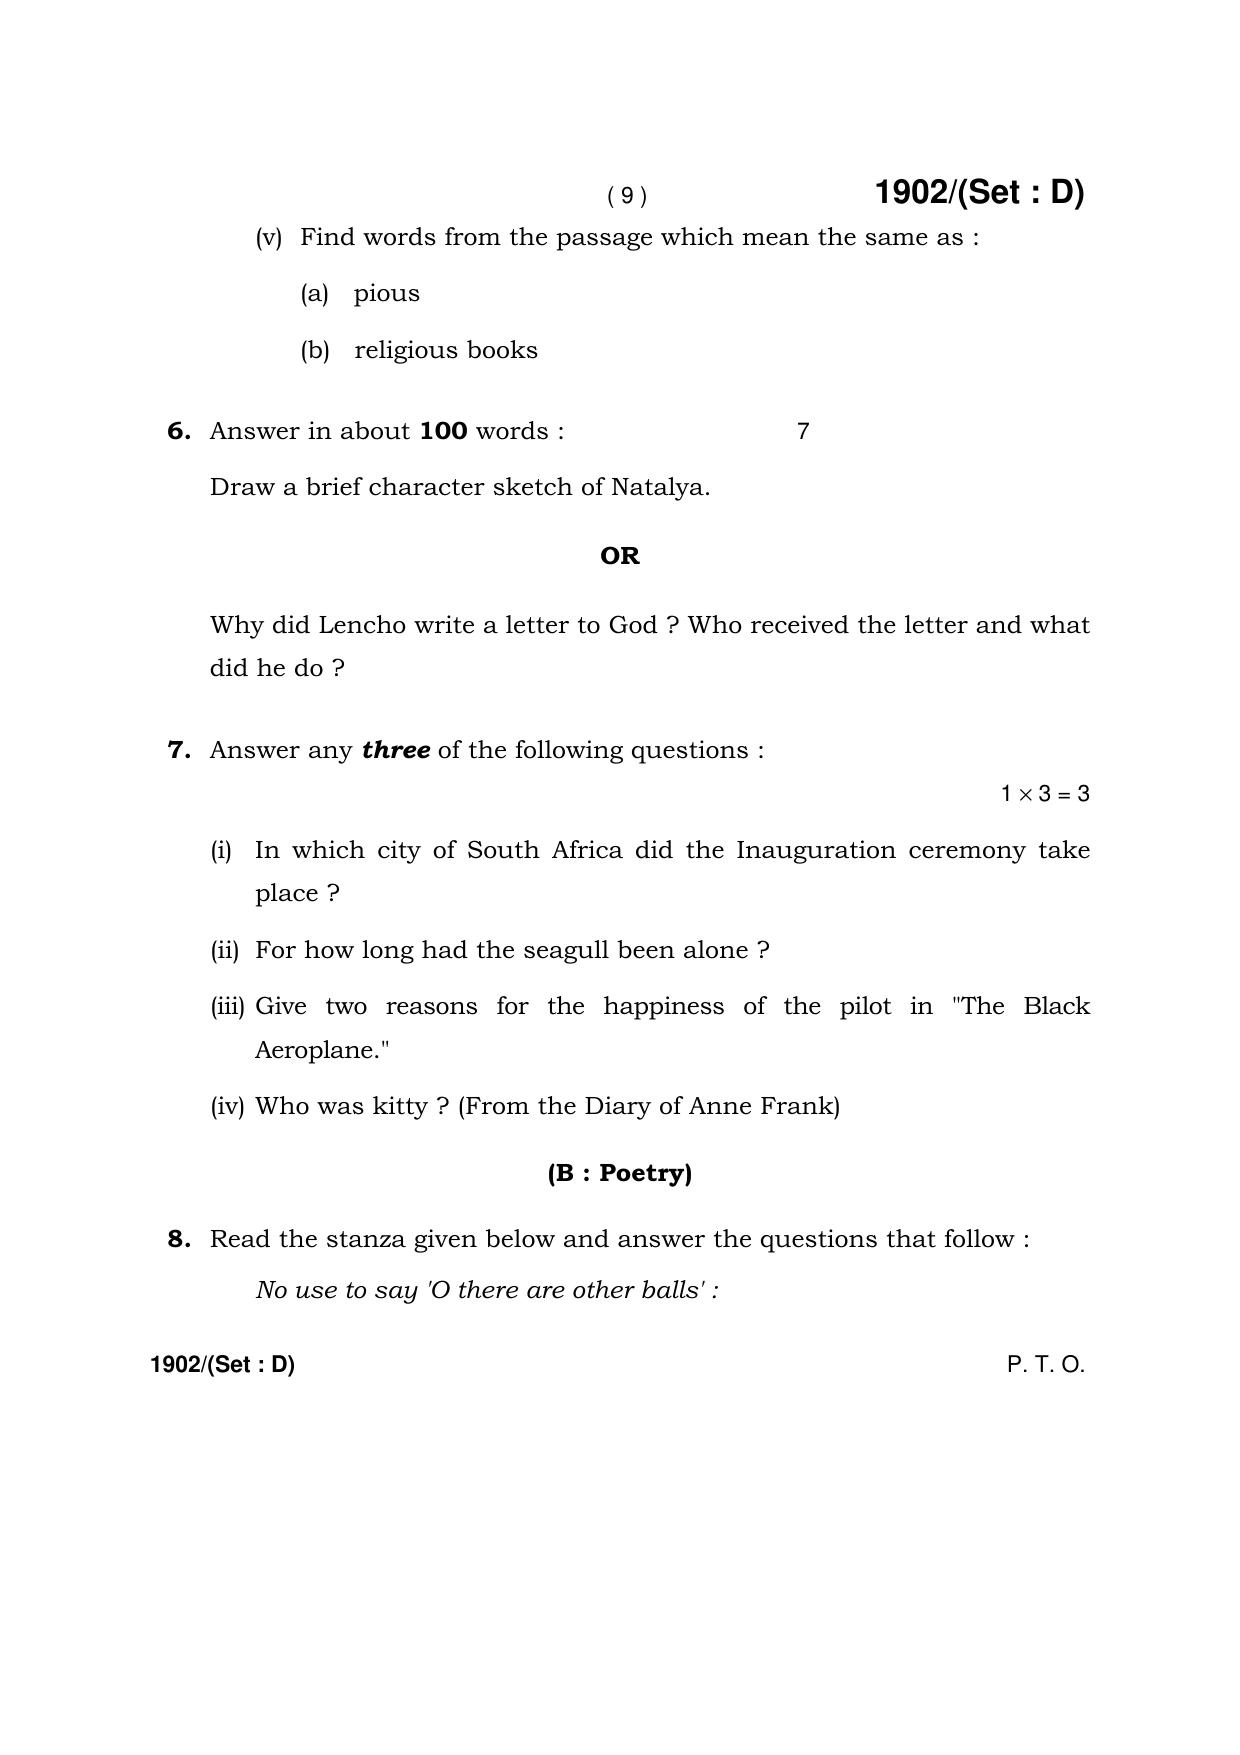 Haryana Board HBSE Class 10 English -D 2017 Question Paper - Page 9